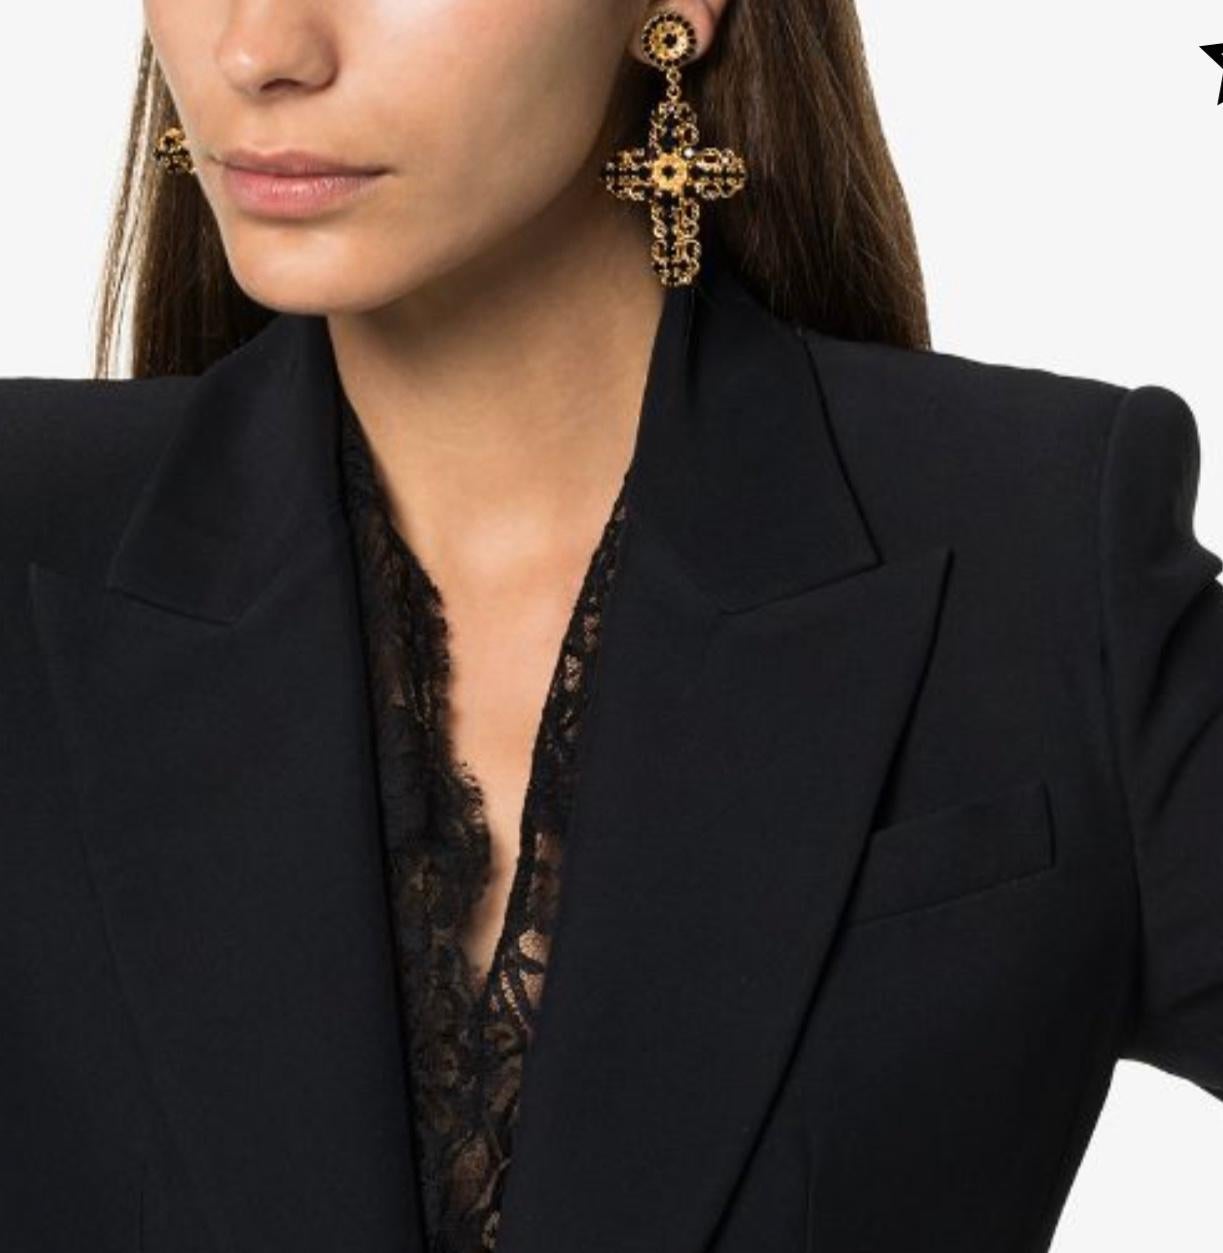 DOLCE & GABBANA

Gorgeous brand new with tags, 100% Authentic Dolce & Gabbana Earrings.

Model: Clip-on Dangling
Motive: Cross Religious
Material: 50% Brass, 50% Glass

Color: Gold
Crystals: Black

Logo details
Made in Italy

Length: 7cm


Dolce &